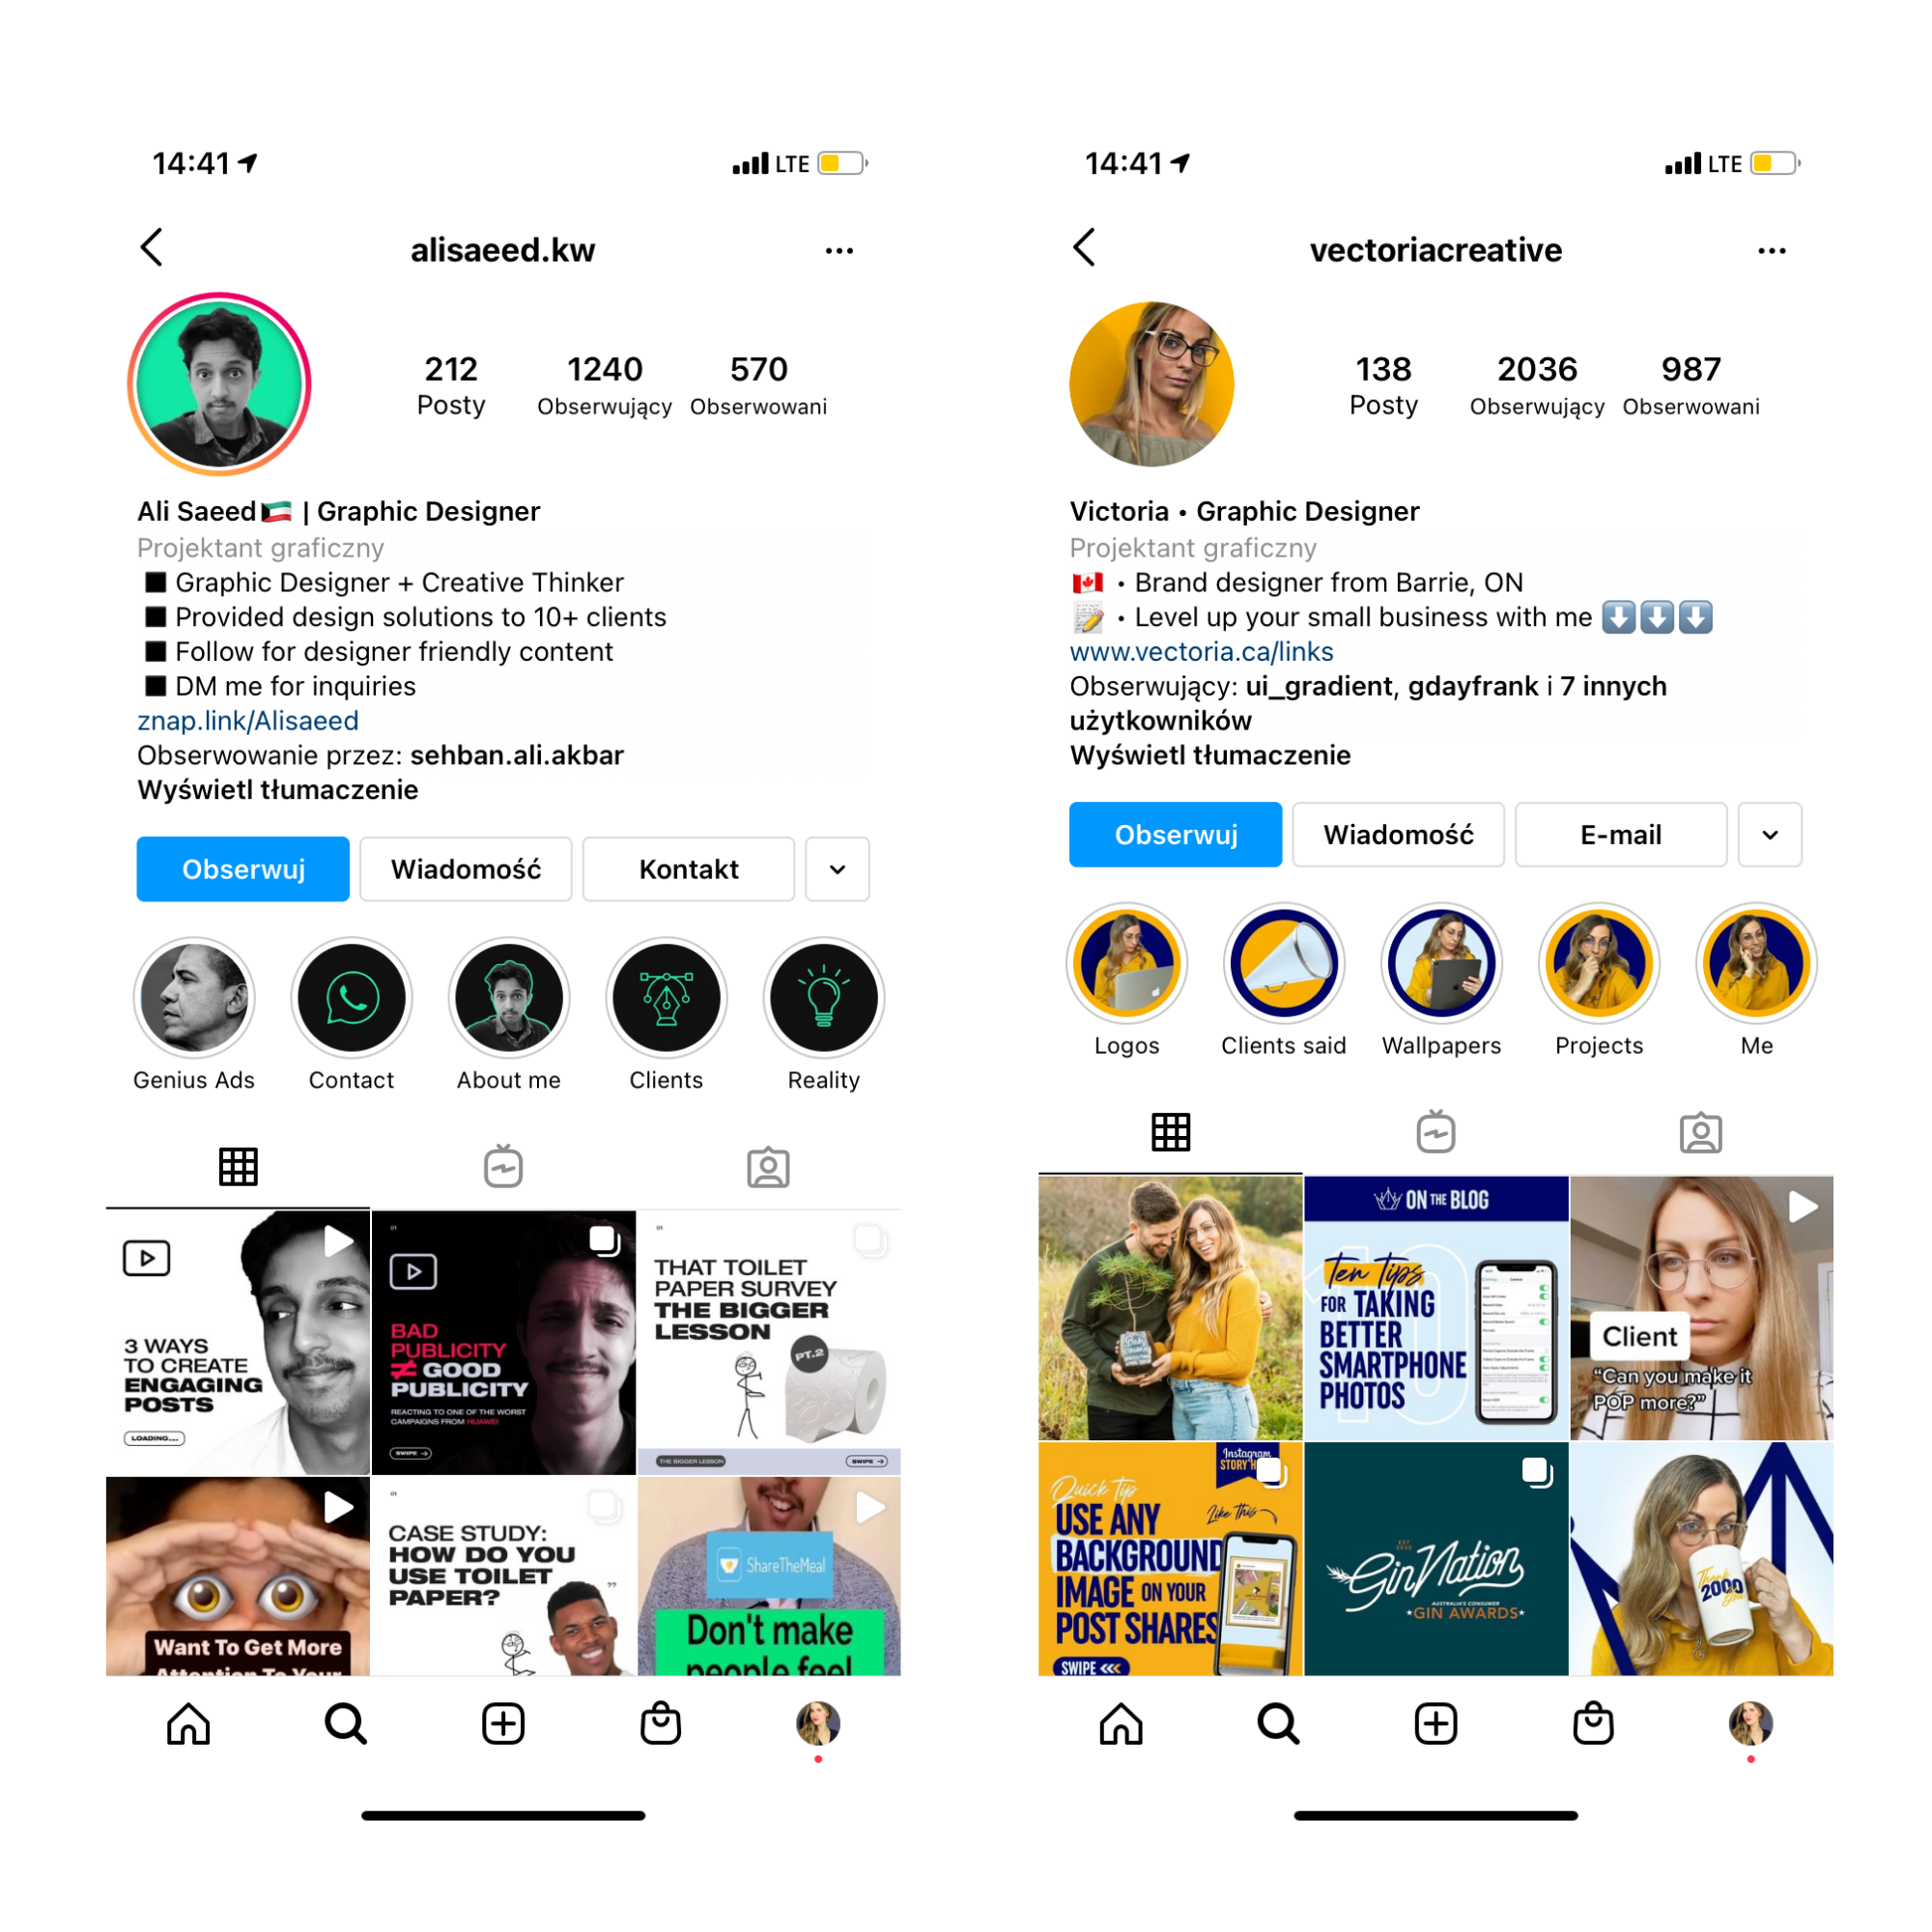 How to choose good profile pictures for Instagram